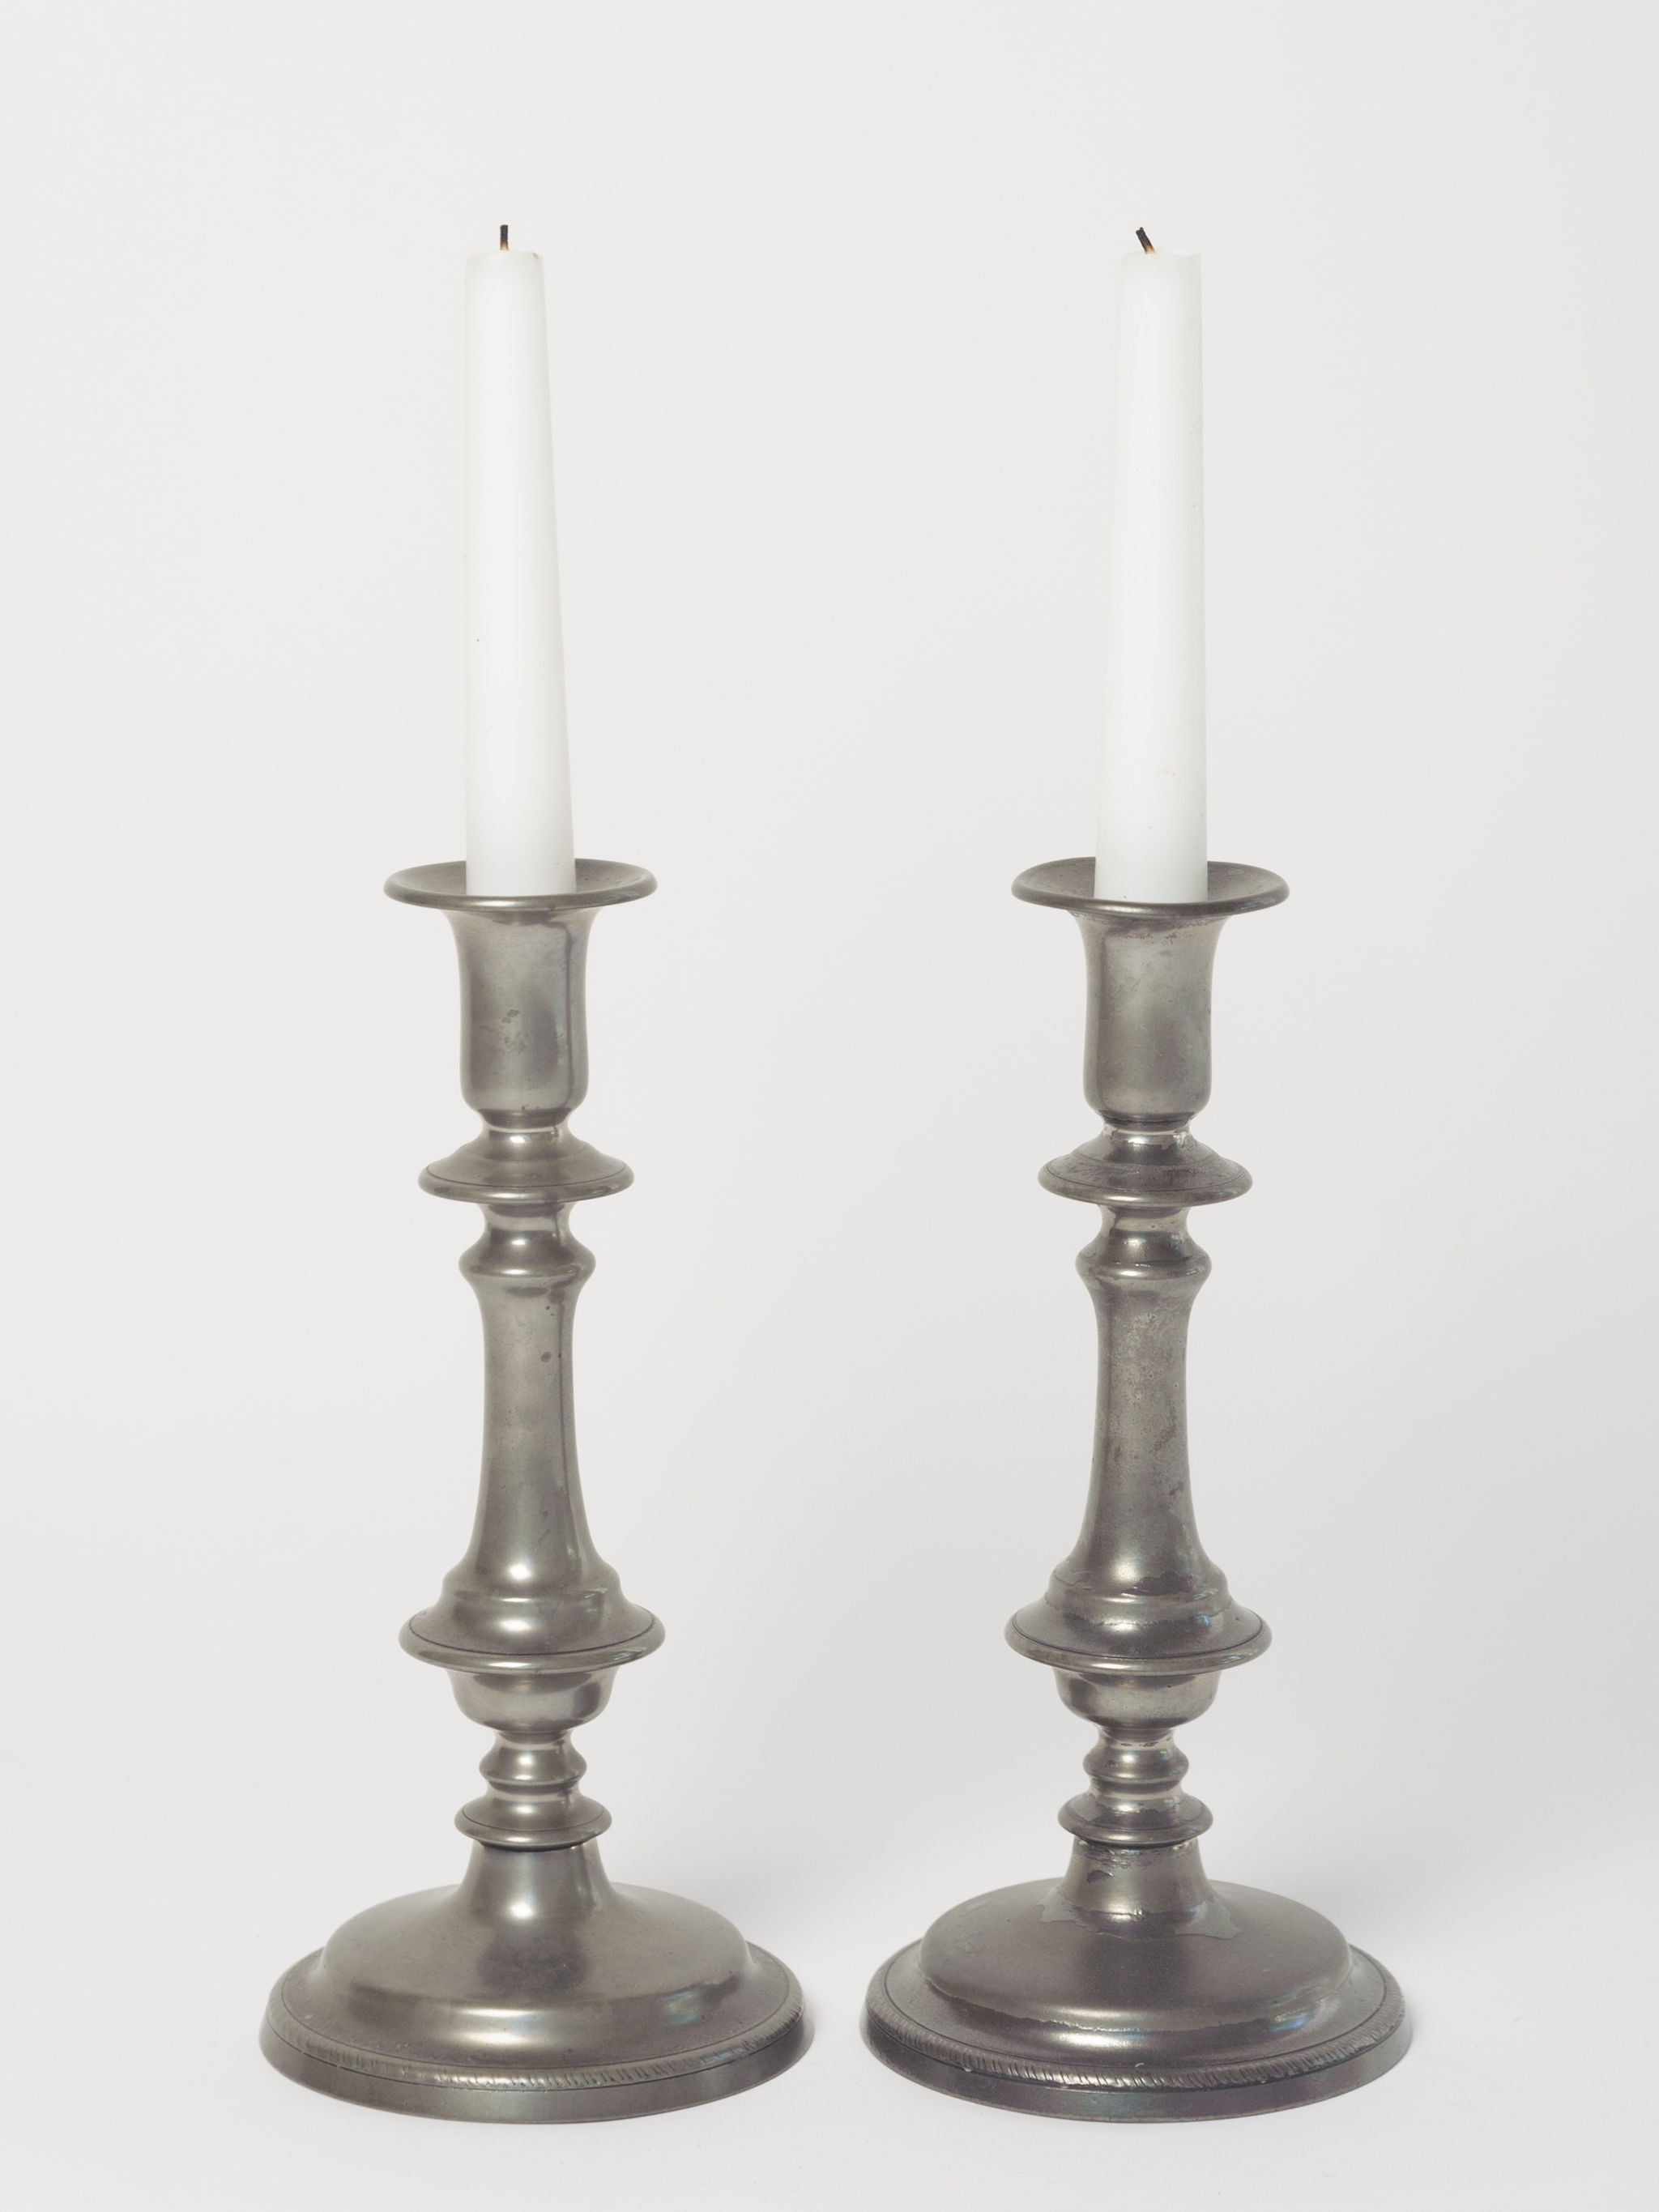 Three 18th Century Pewter Candlesticks Sold At Auction On, 60% OFF